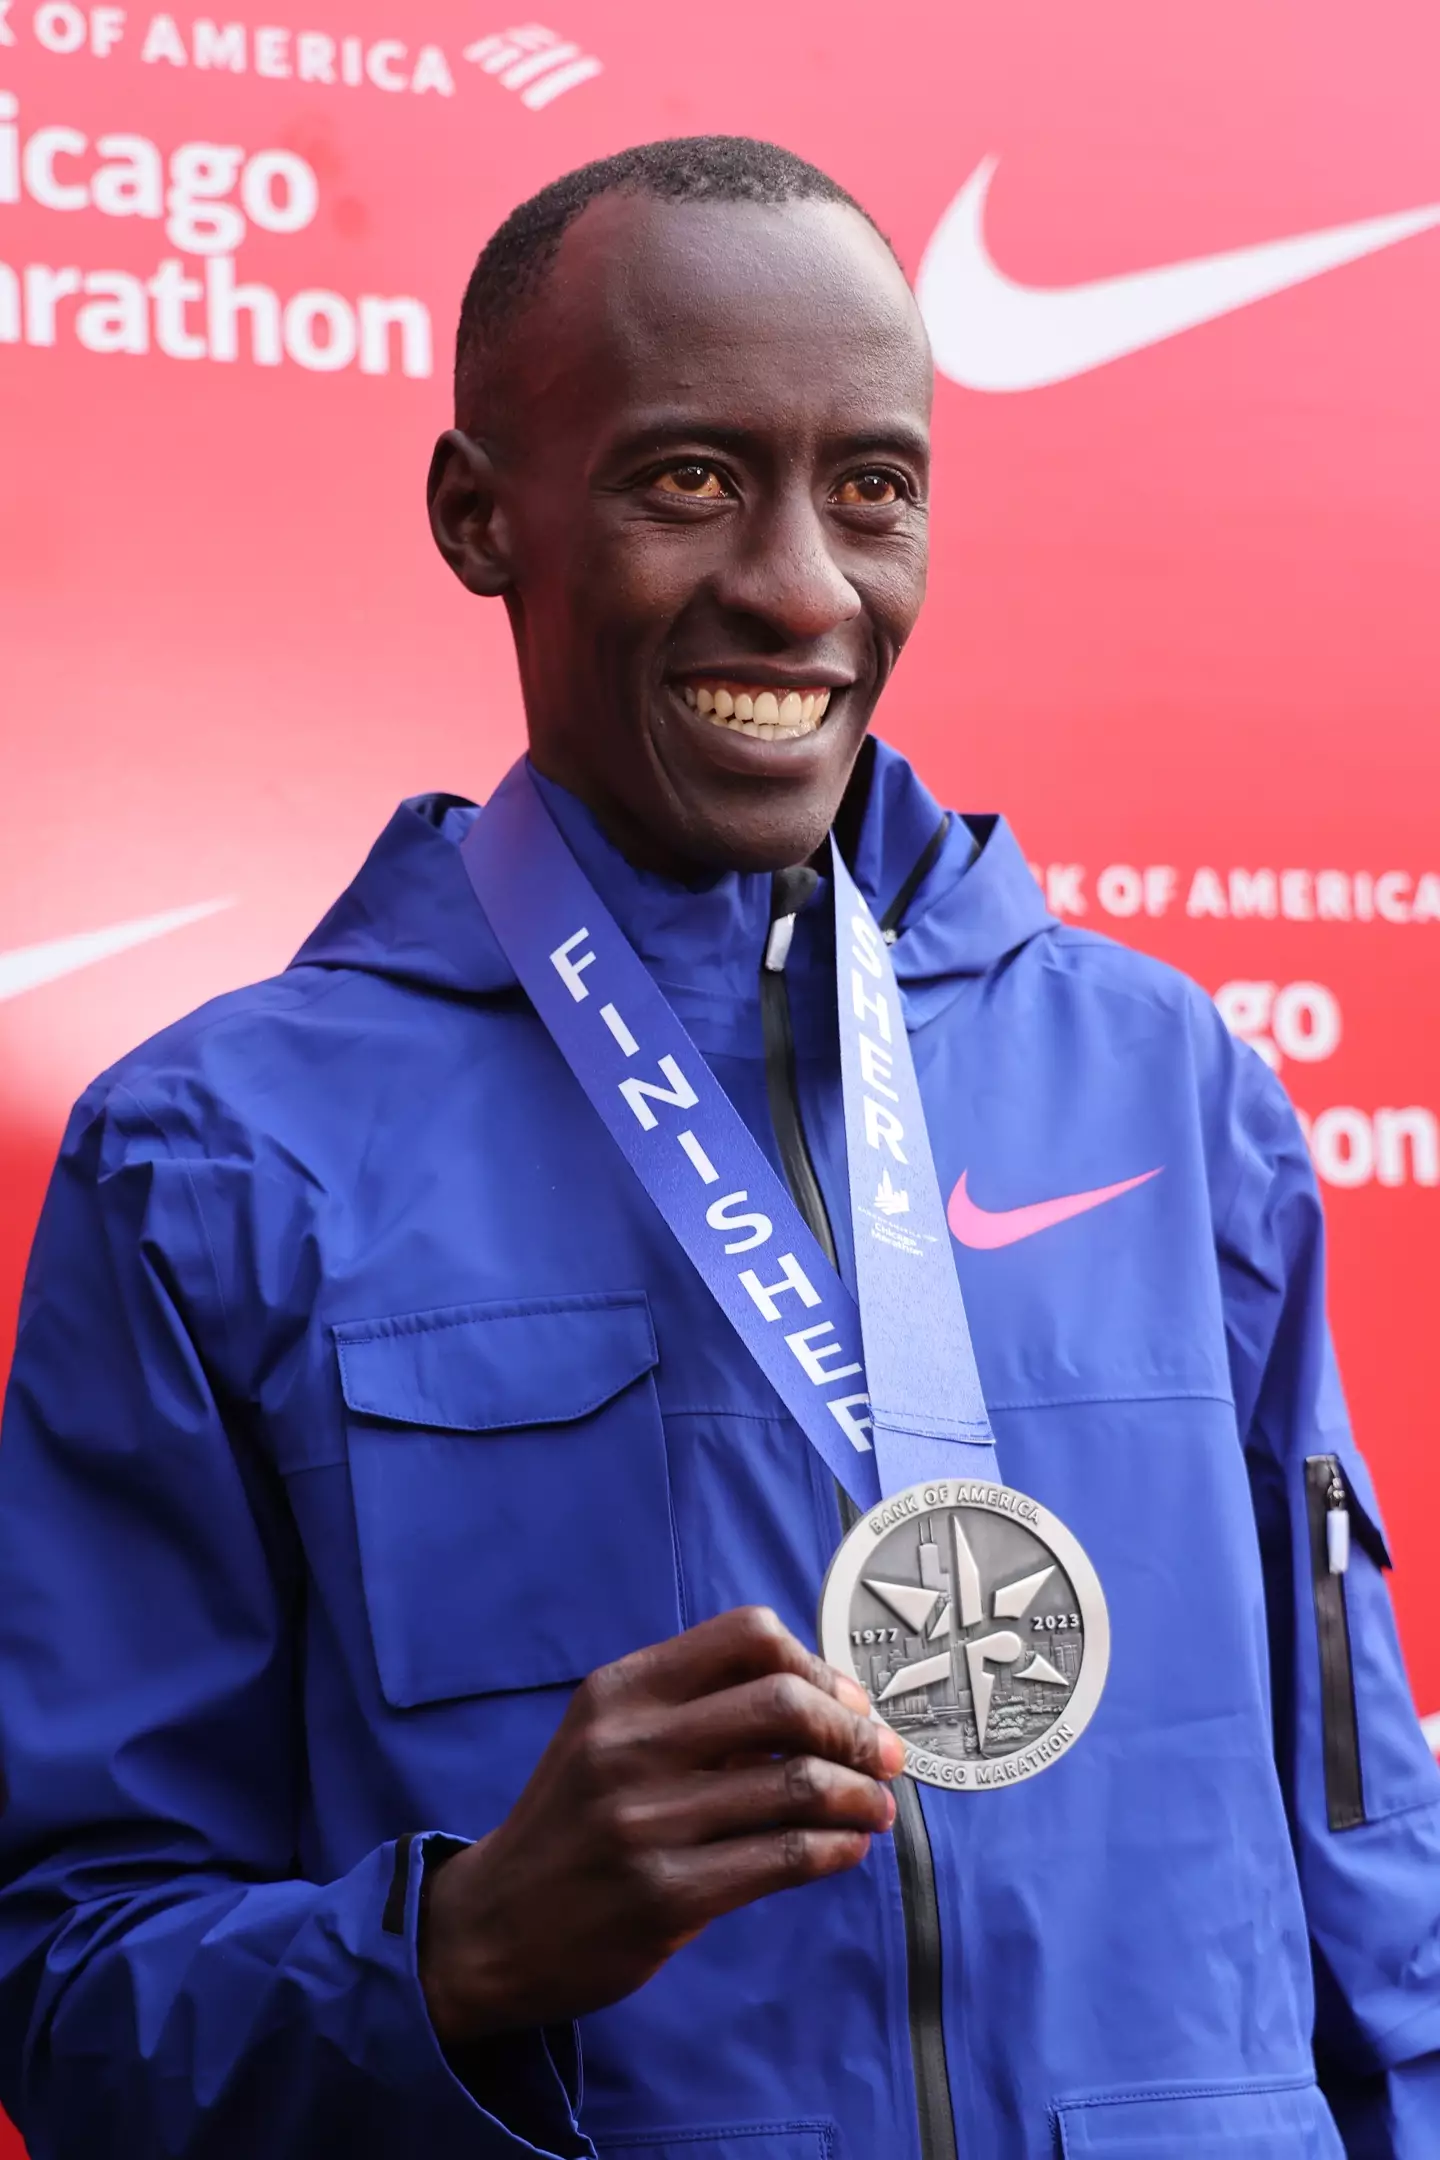 The marathon world record holder was involved in a serious collision.